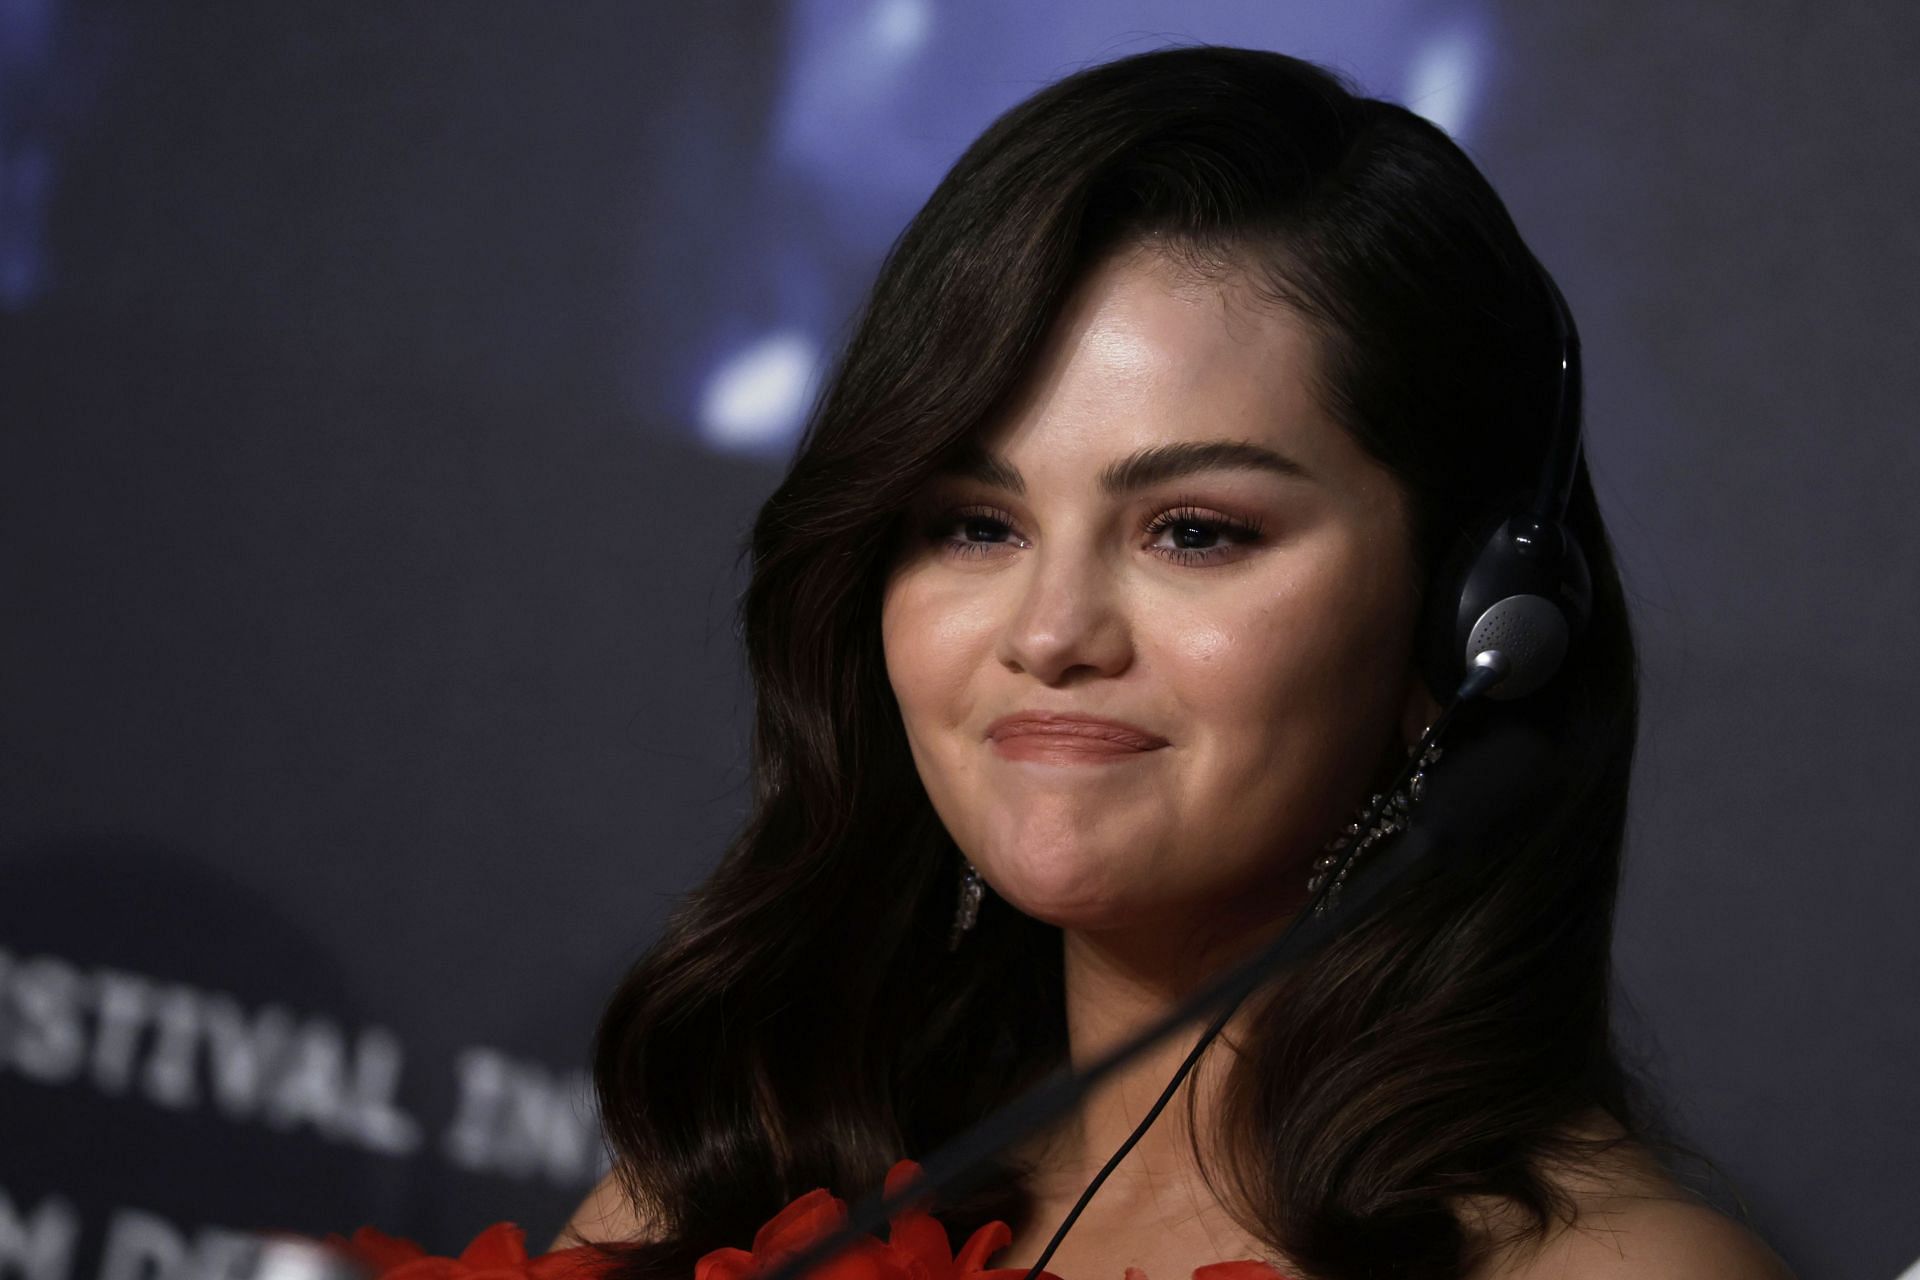 Where does Selena Gomez live? (Photo by Guillaume Horcajuel - Pool/Getty Images)